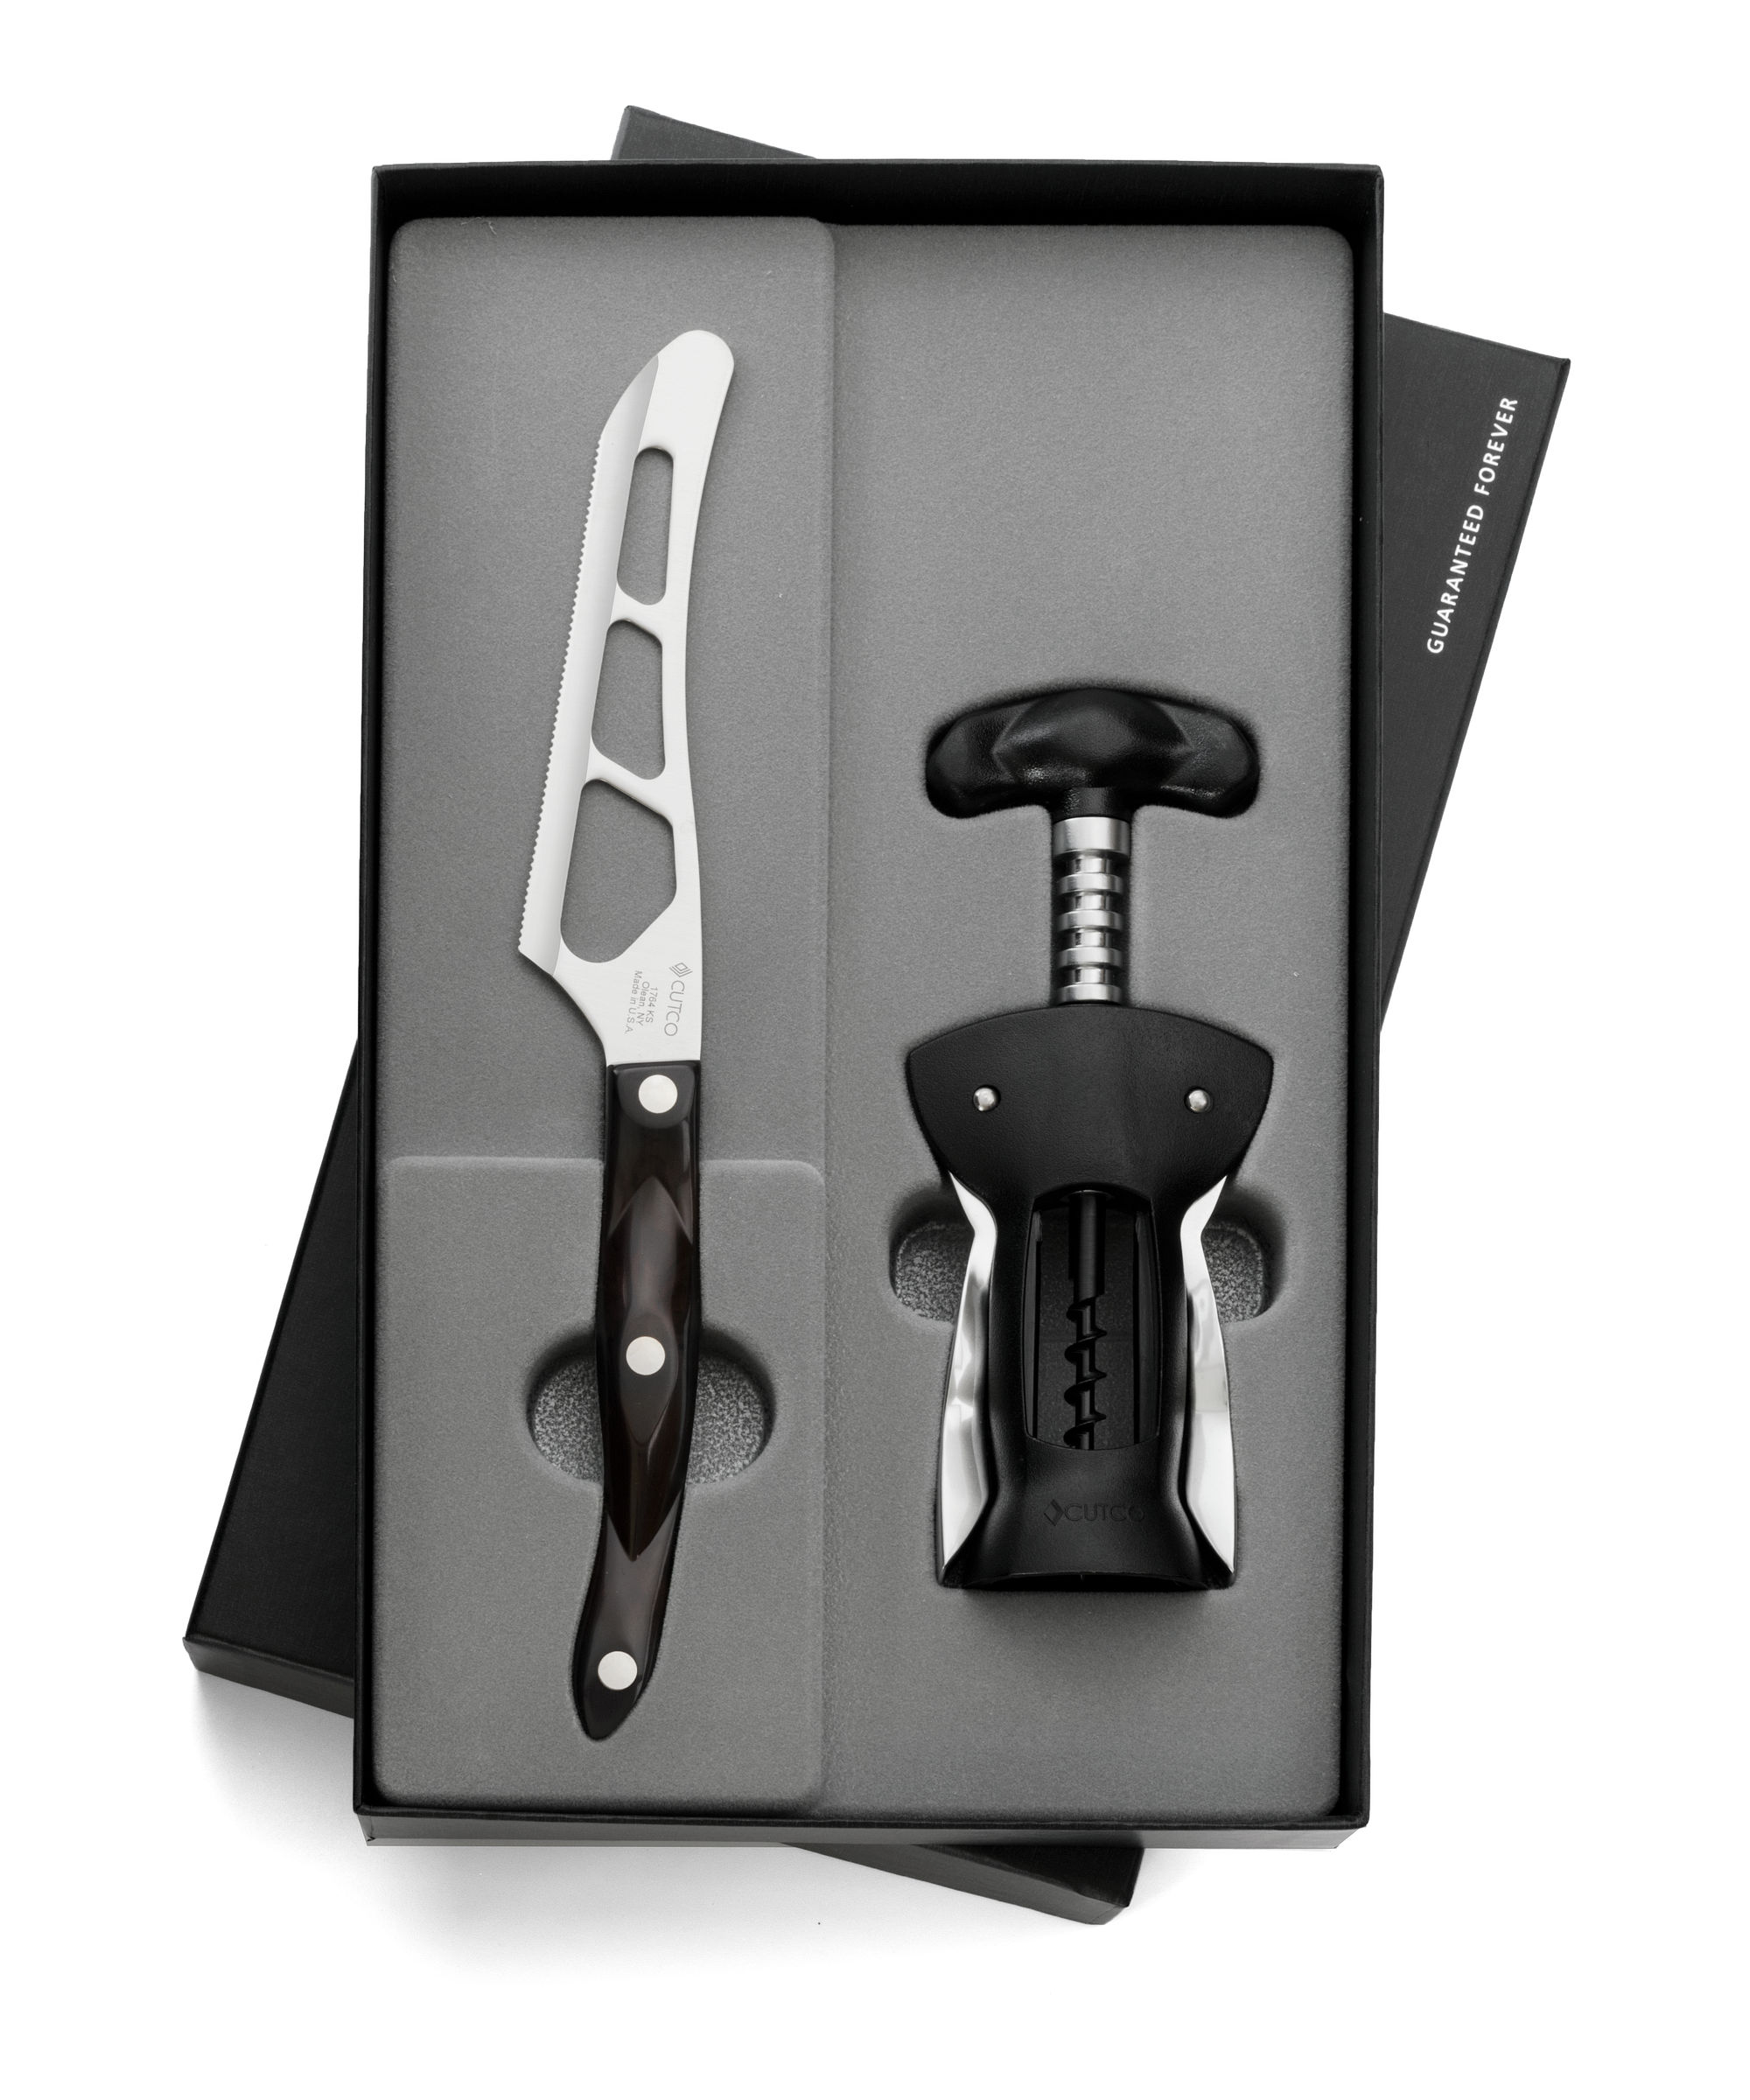 2-Pc. Cheese Knife Set  Gift-Boxed Knife Sets by Cutco